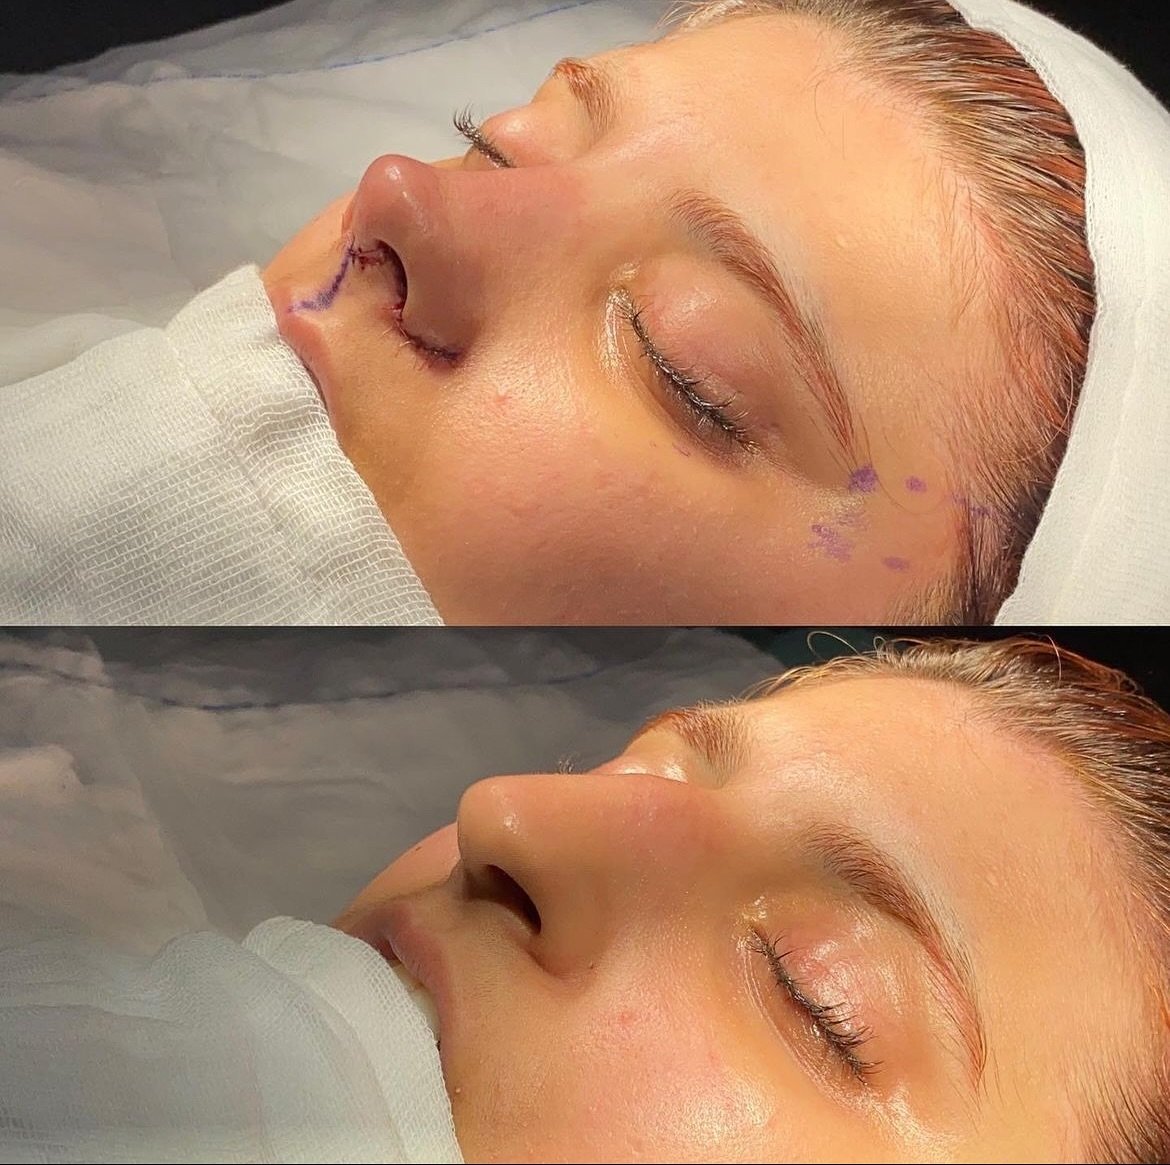 Hello everyone 💛

We wanted to share with you a story about one of our patients from Canada who recently underwent Rhinoplasty. At first, she was nervous about the procedure, but we did everything in our power to make sure she was comfortable and we